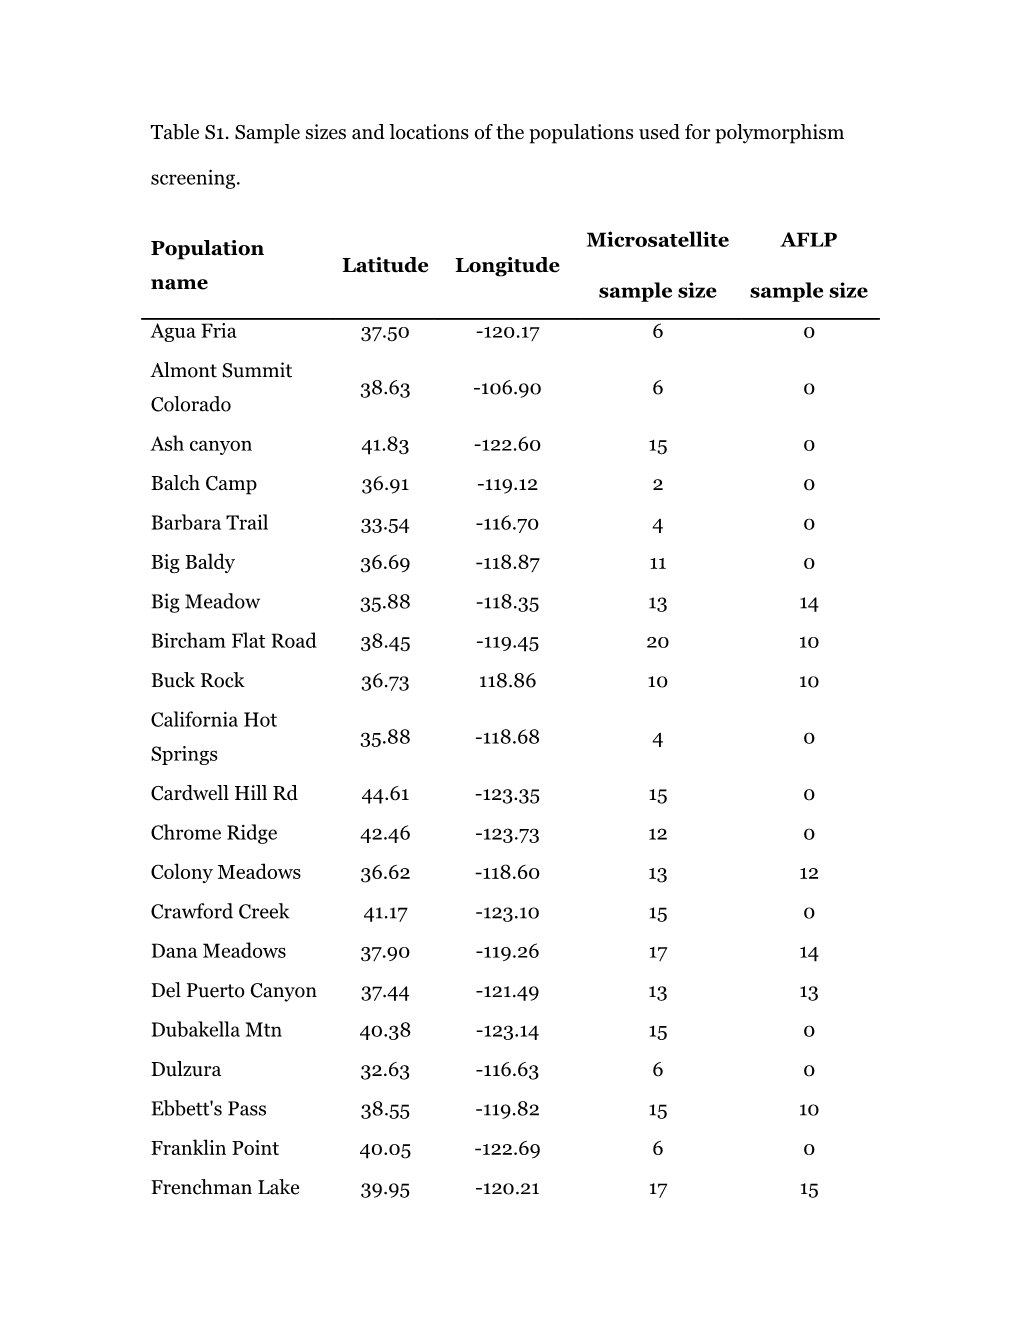 Table S1. Sample Sizes and Locations of the Populations Used for Polymorphism Screening